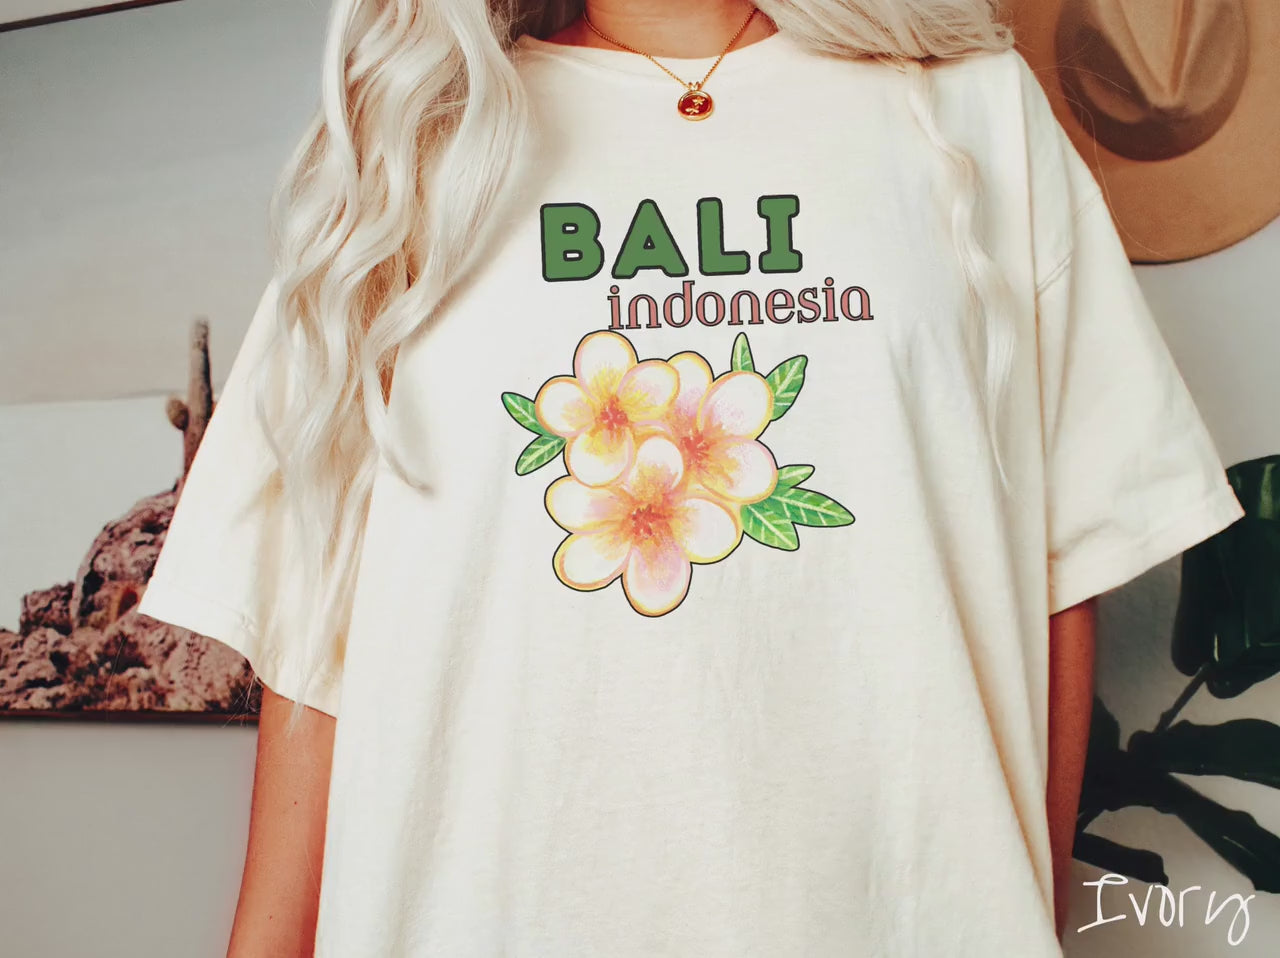 The Bali Indonesia Shirt, Gift This Tropical Vacation Shirt To Your Favorite Resorter!